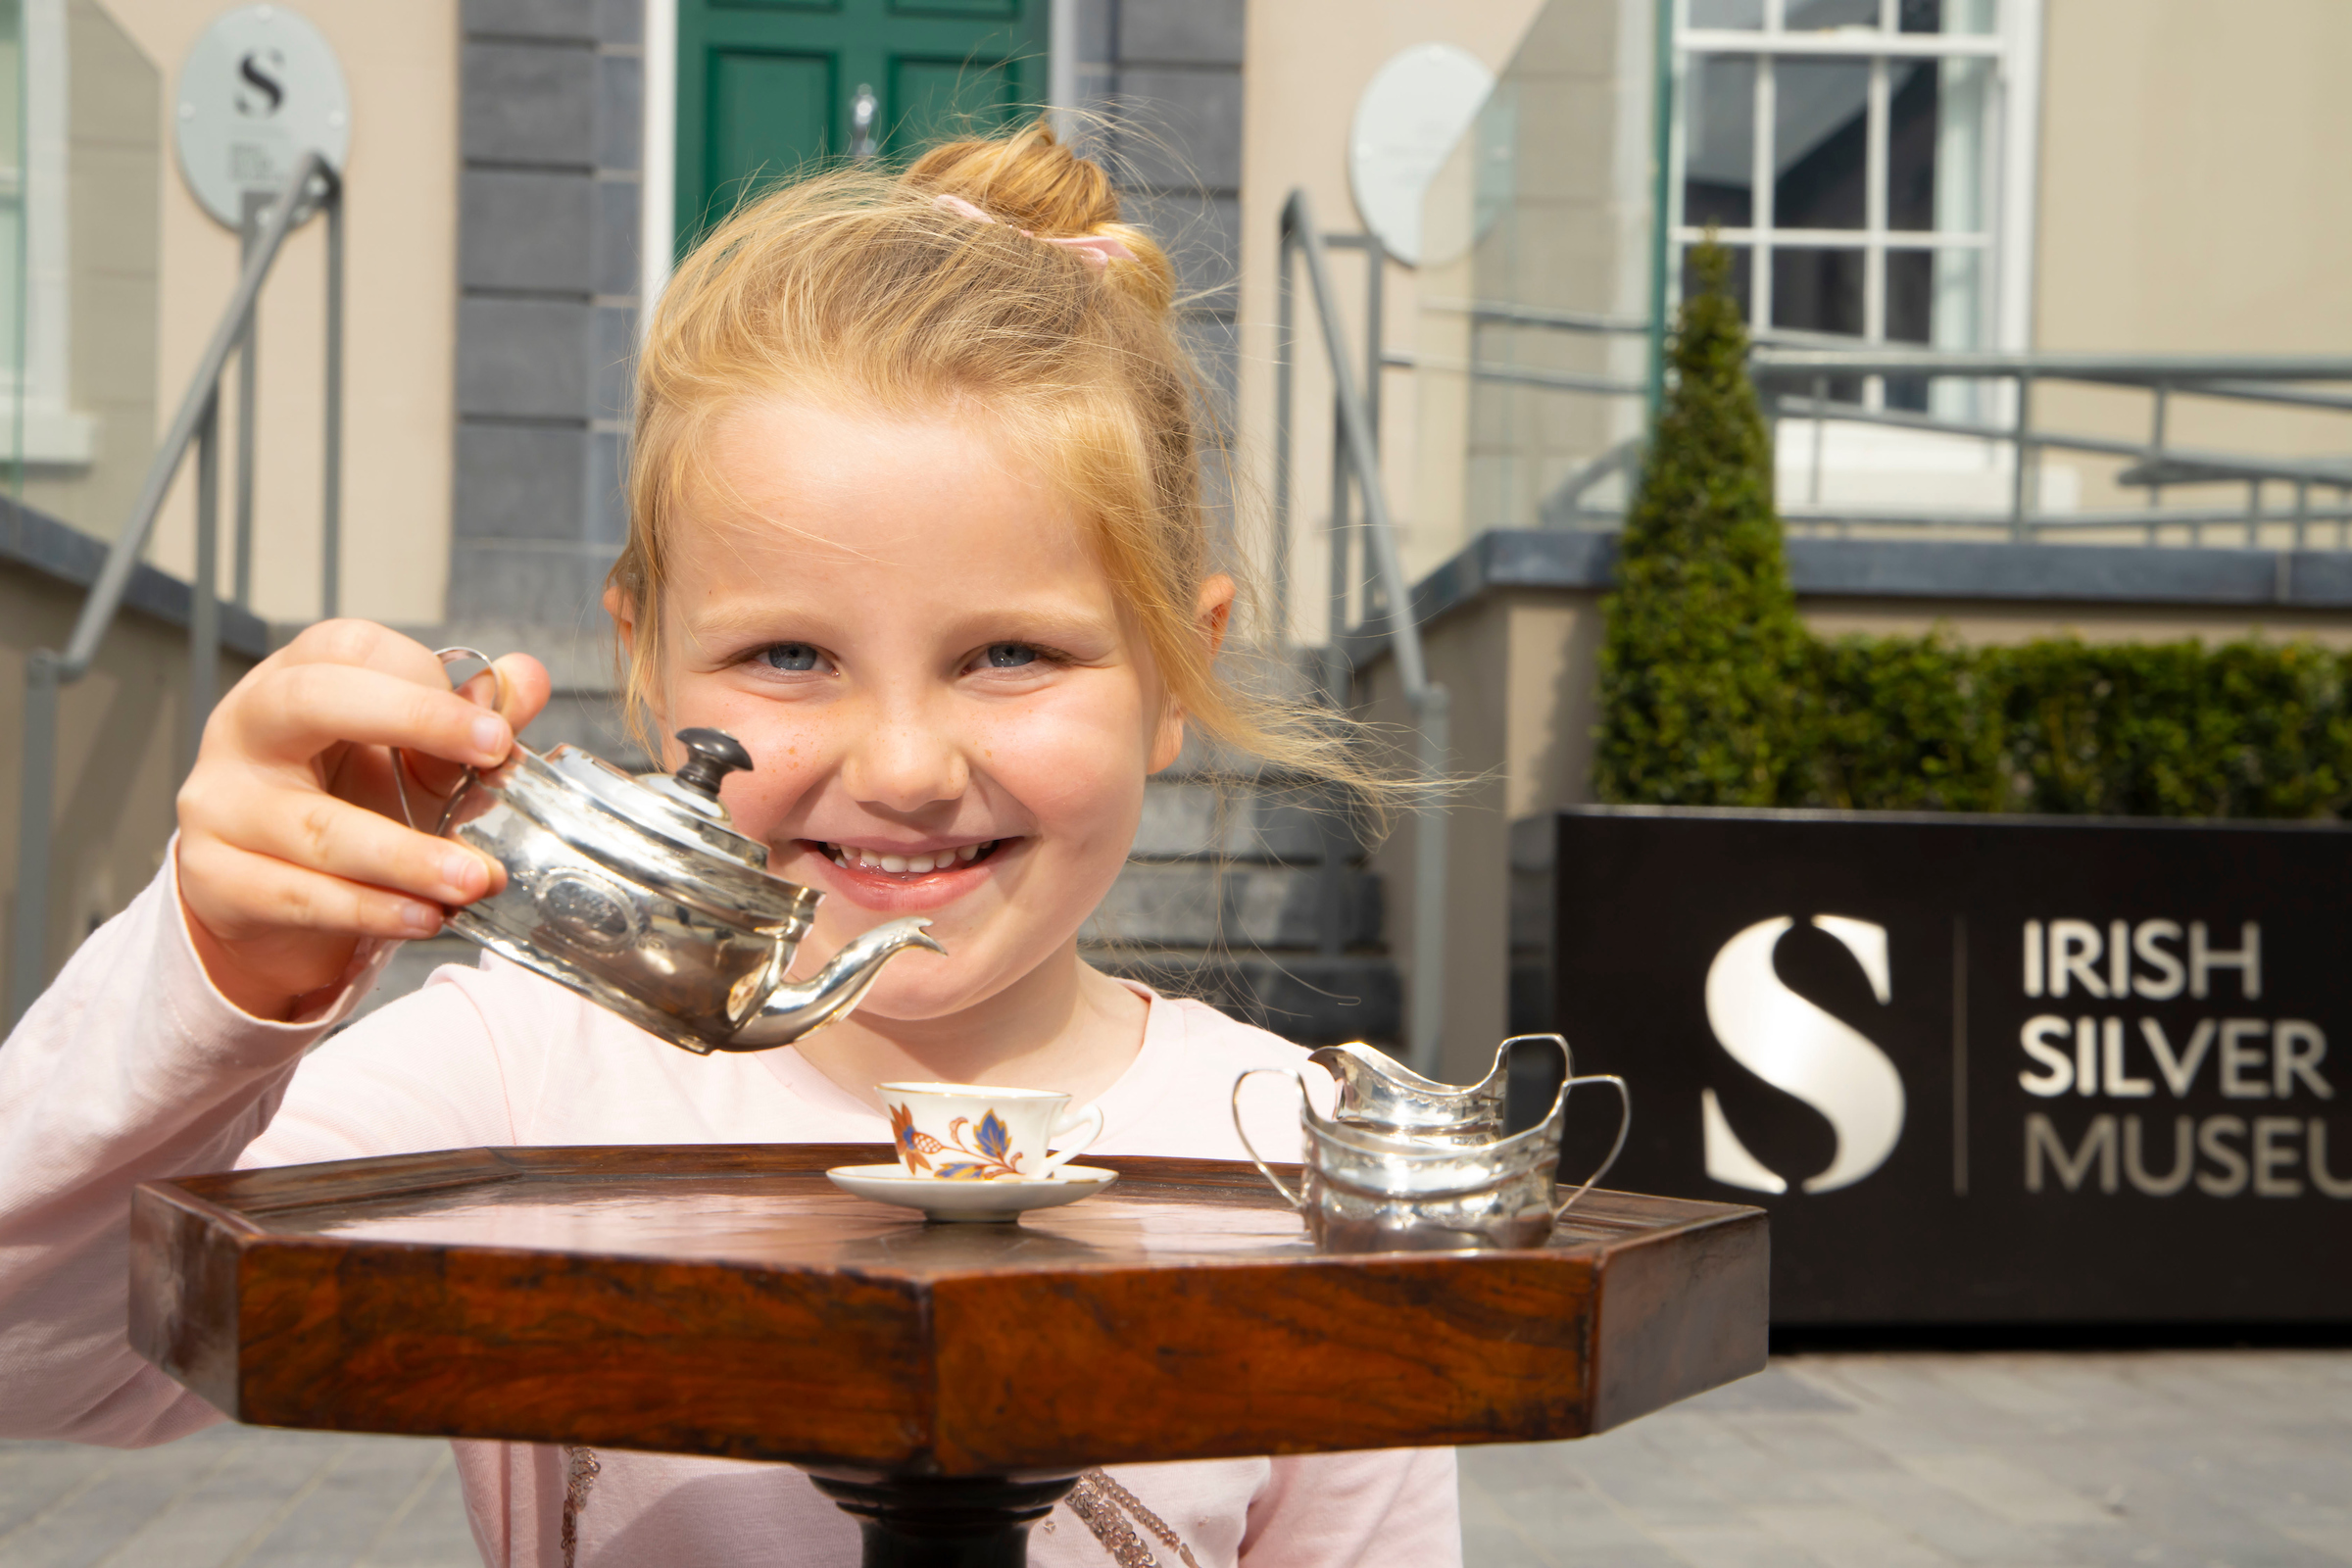 Pictured at the spectacular new Irish Silver Museum is the first visitor to the museum, Pearla Harper from Tramore (age 5). The museum is home to one of the largest collections of Irish silver in the world and is officially opened today (June 24th) by Minister for Finance Paschal Donohoe.